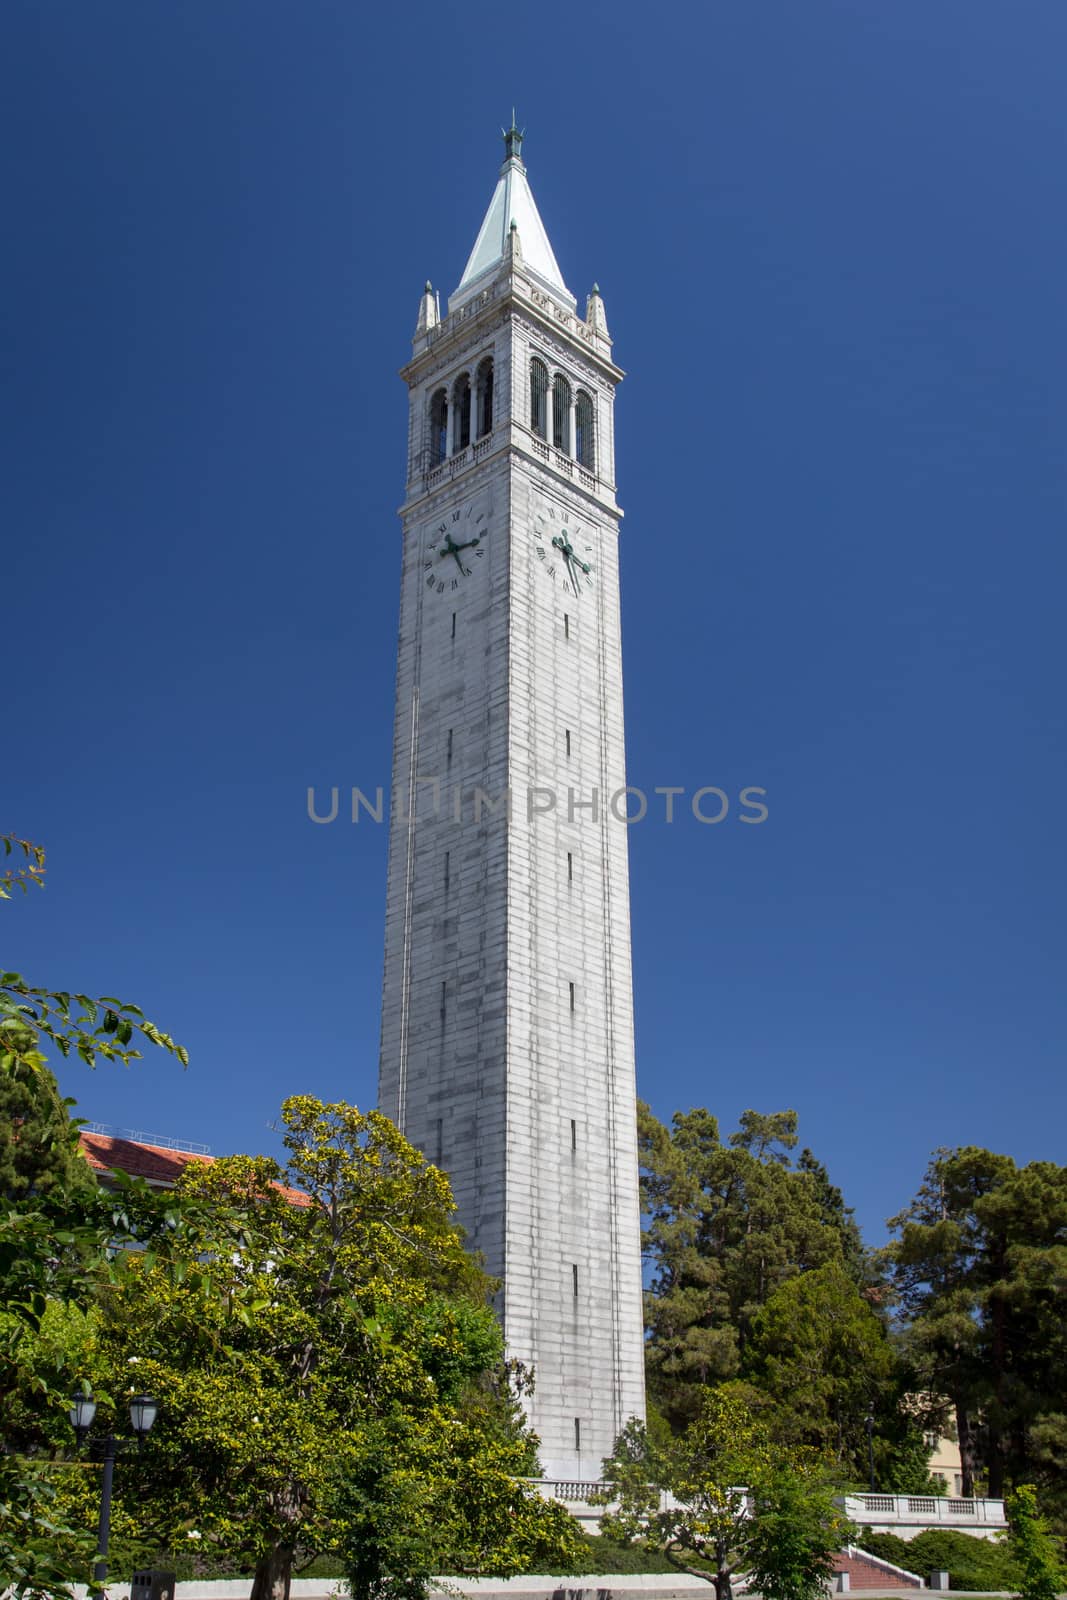 Sather Tower by wolterk